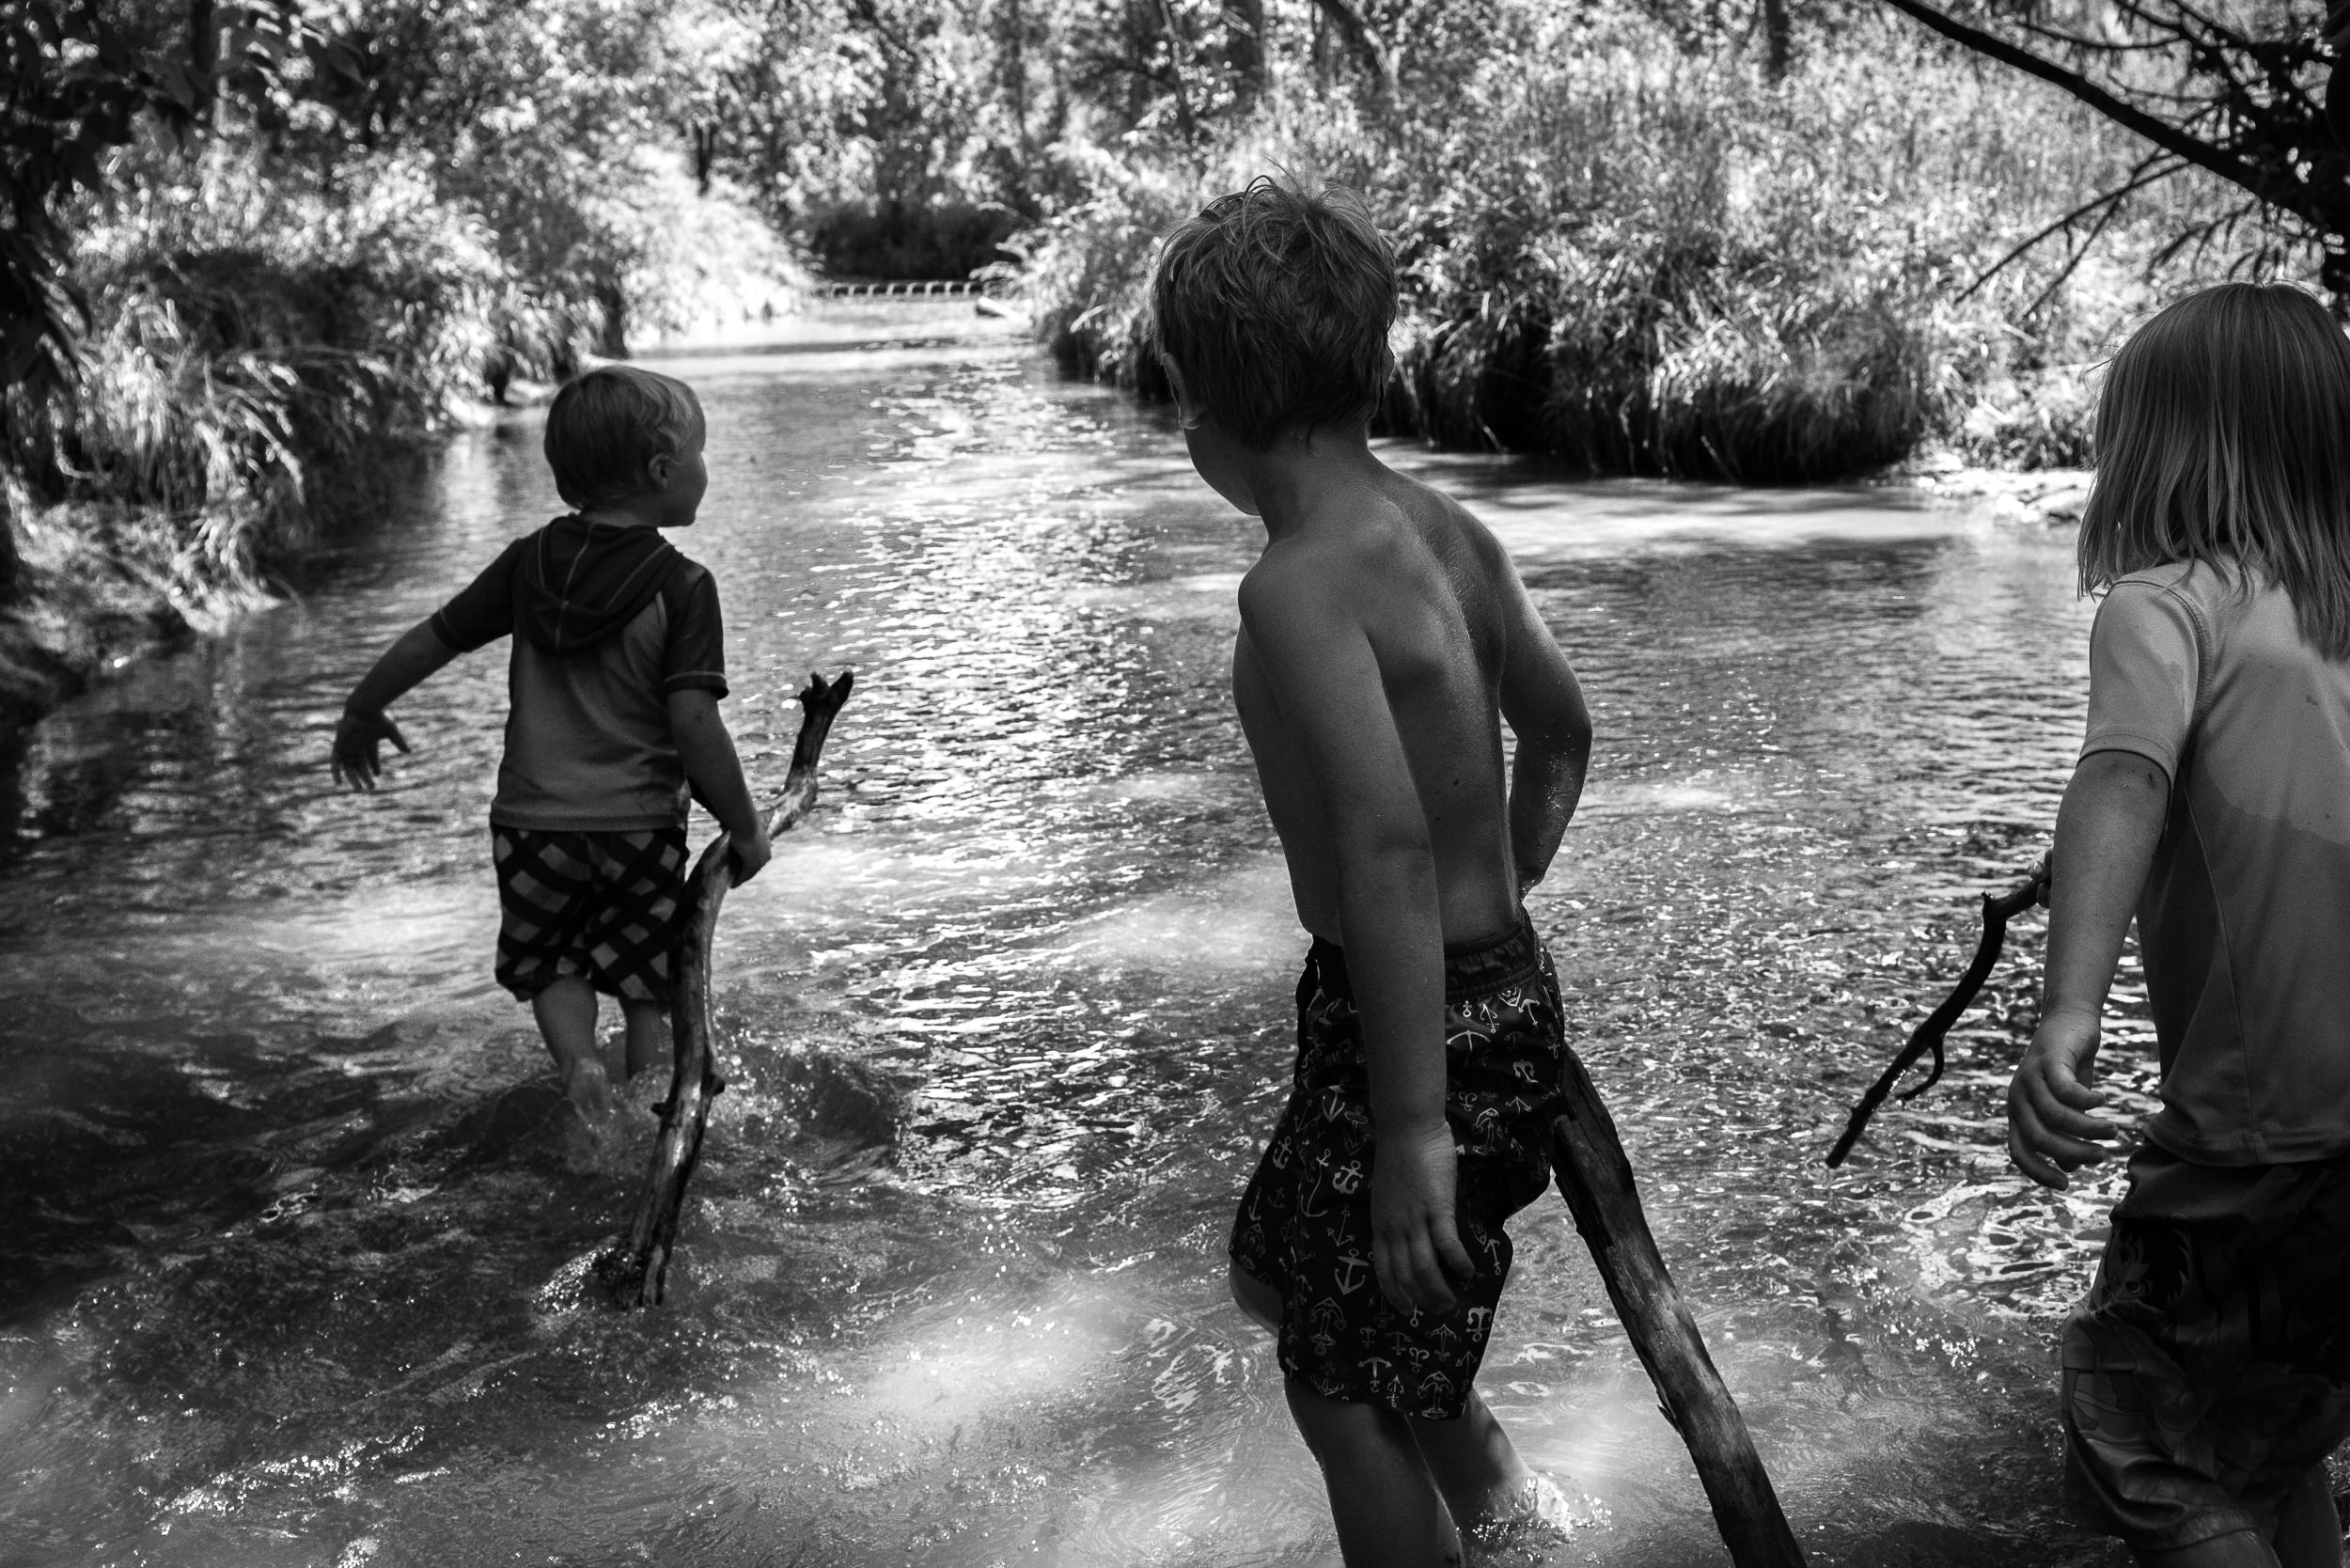 Blog - The Pen & Camera - Molly Rees Photo - Black and White Documentary Childhood Photography - boys wading in stream through woods at Belleview Park in Denver, Colorado by M. Menschel